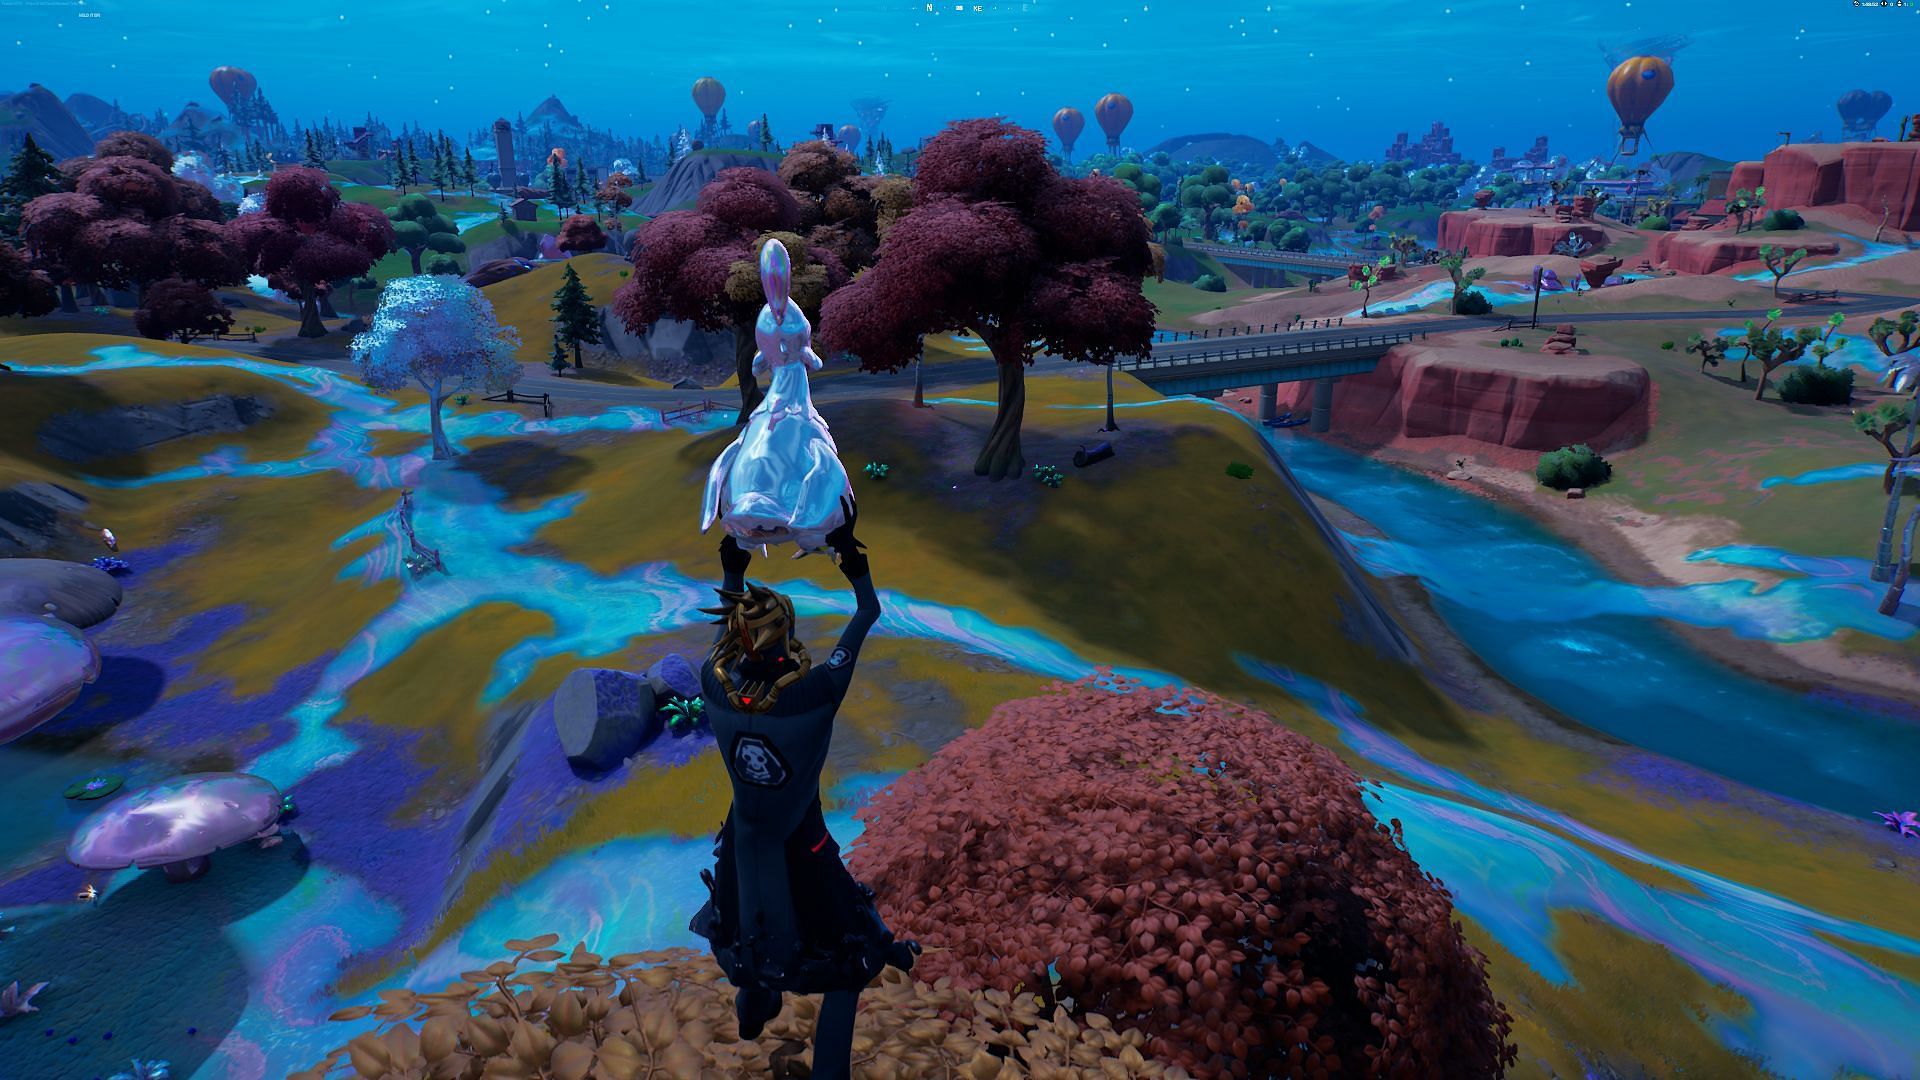 Covering 300 meters with a chicken will be a breeze (Image via Epic Games/Fortnite)